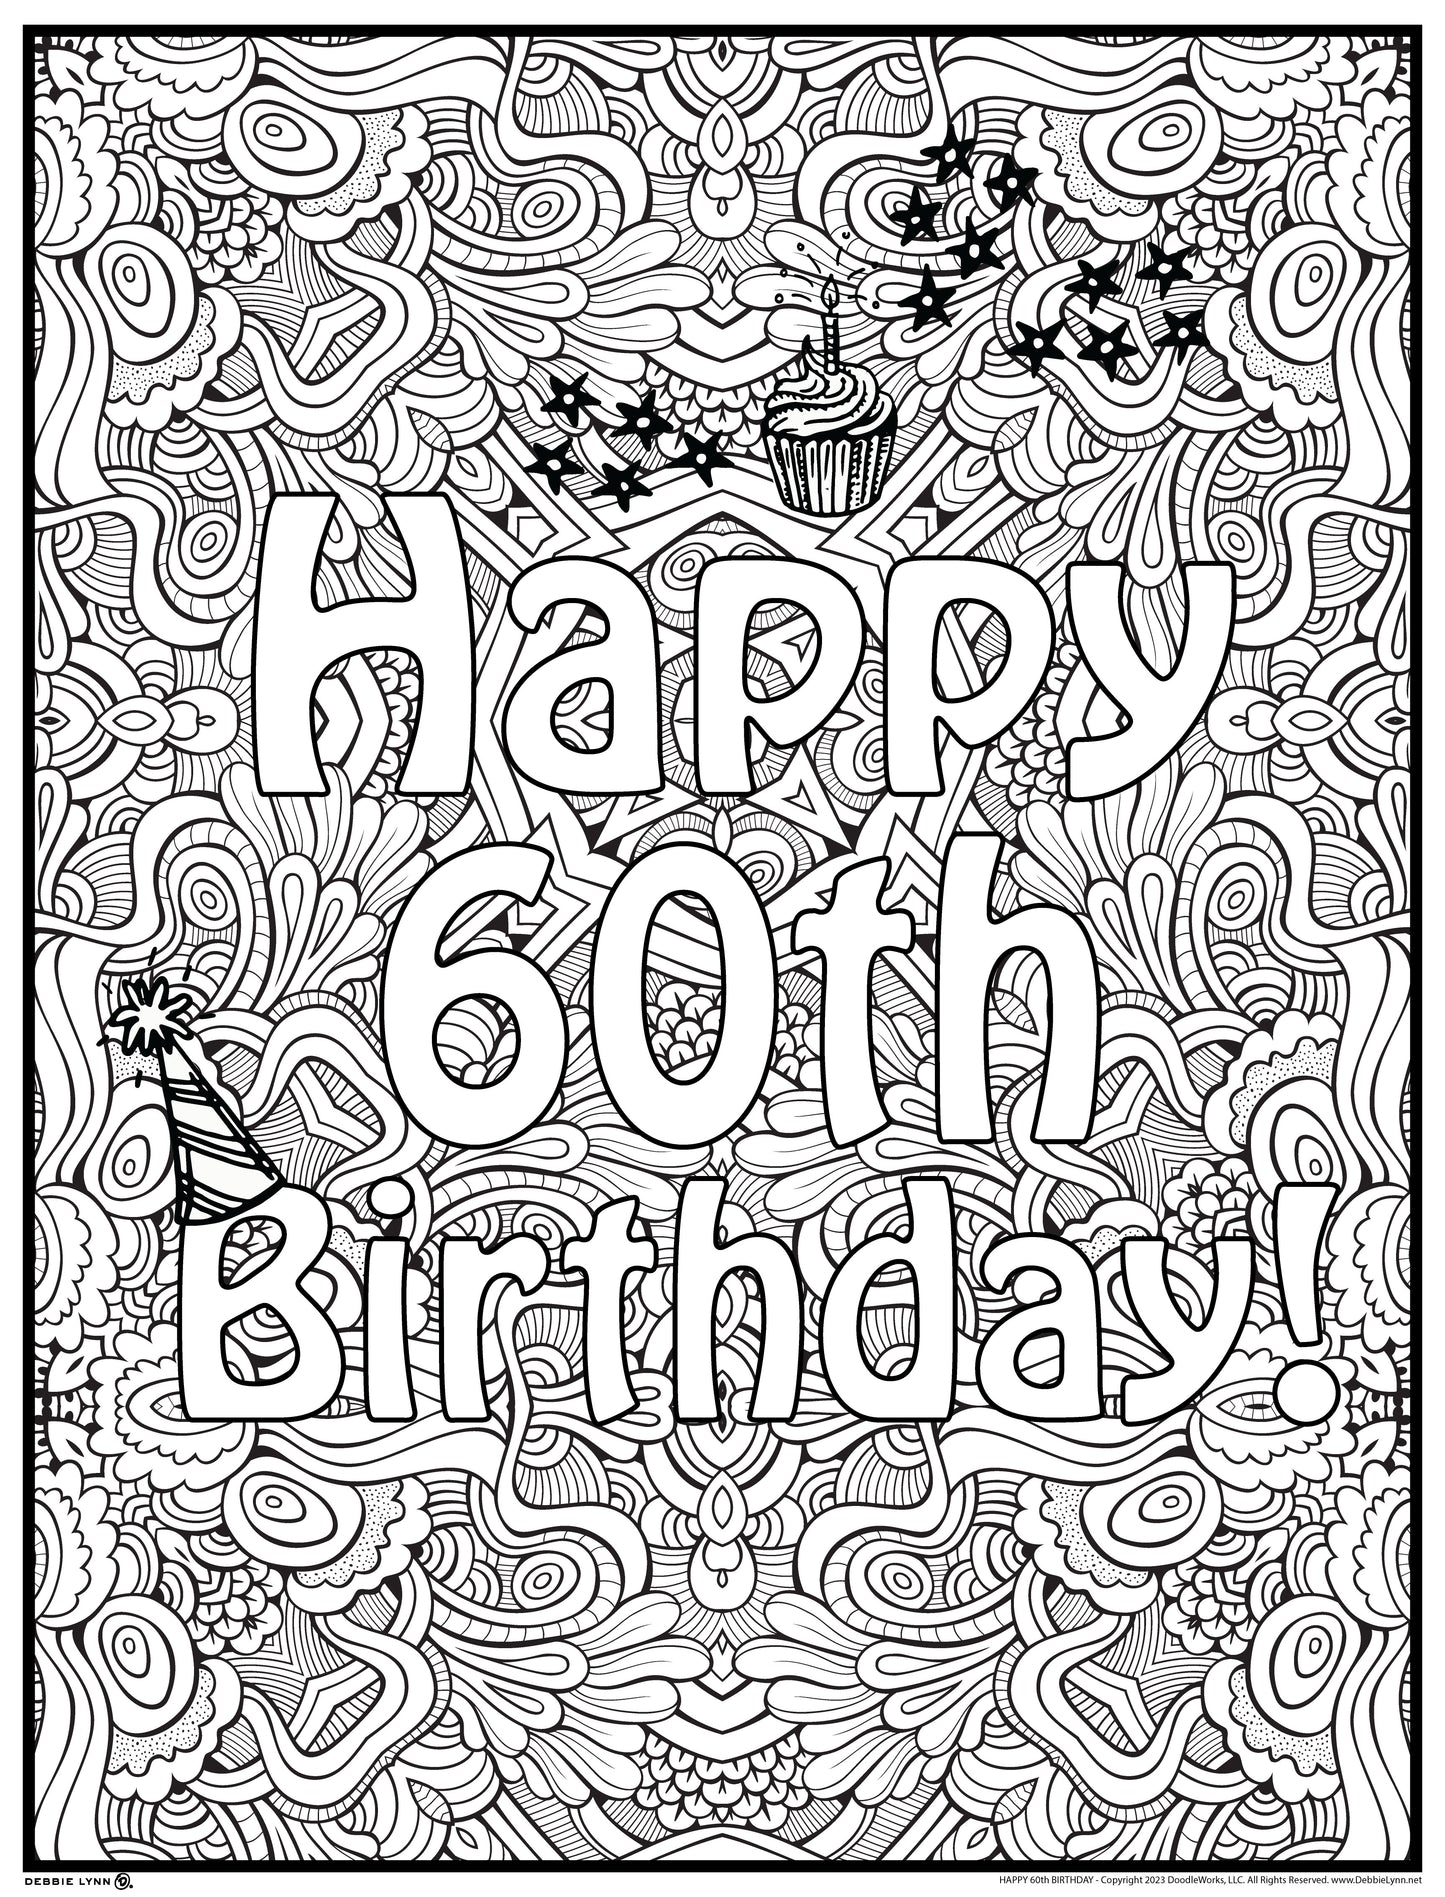 Happy 60 Personalized Giant Coloring Poster 46"x60"